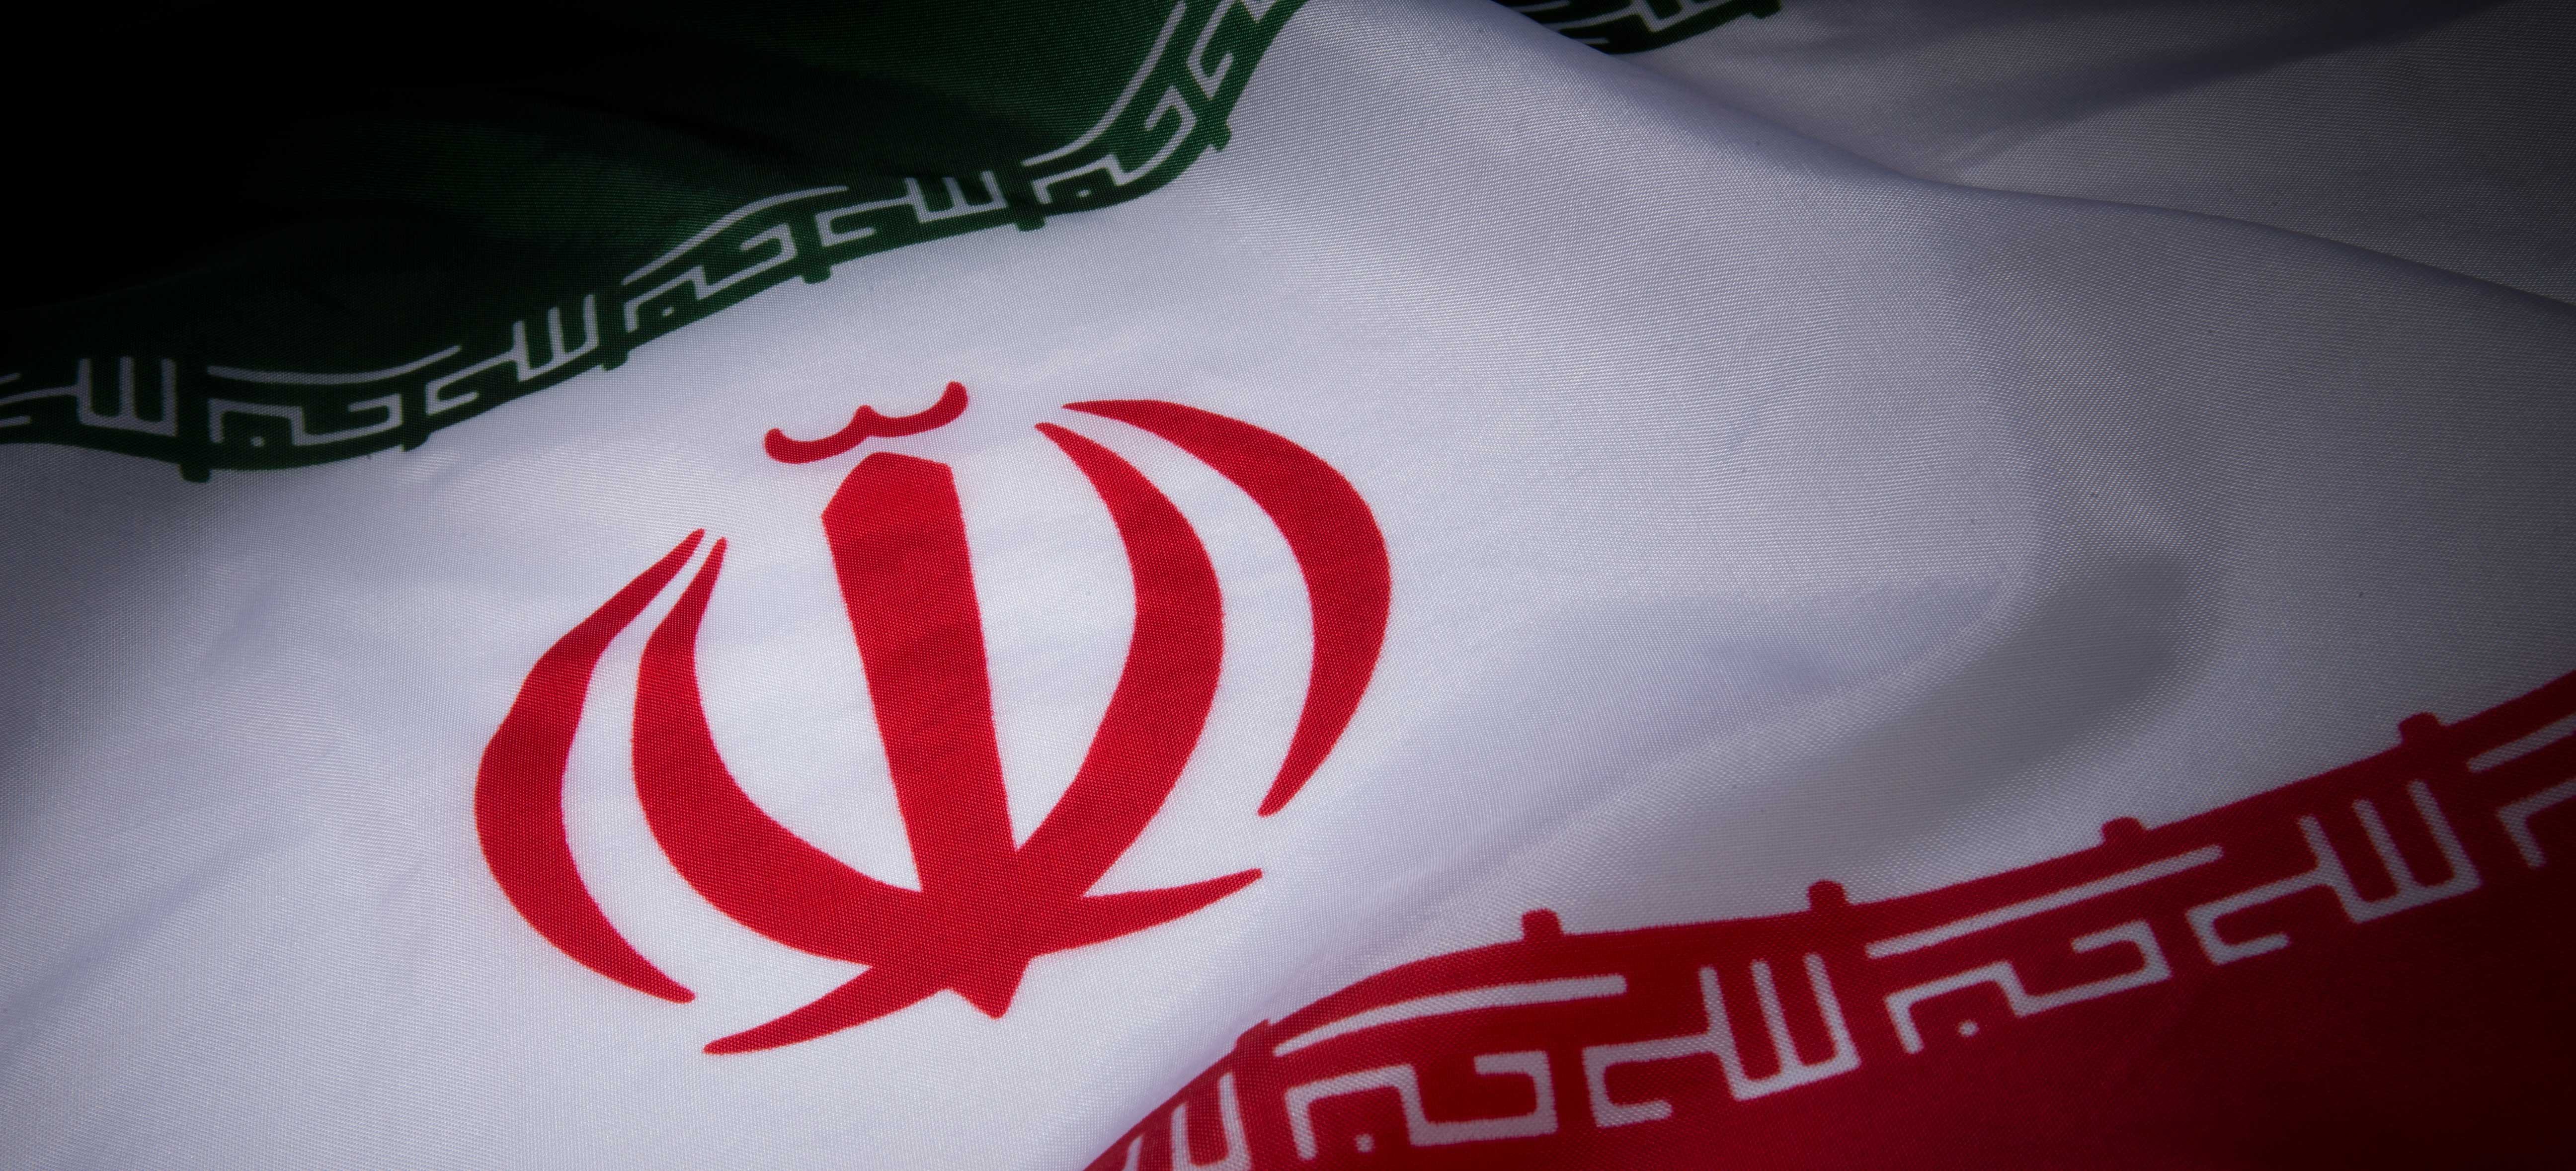 New Swedish Firm Offers Iranian Stock Investment for Bitcoin